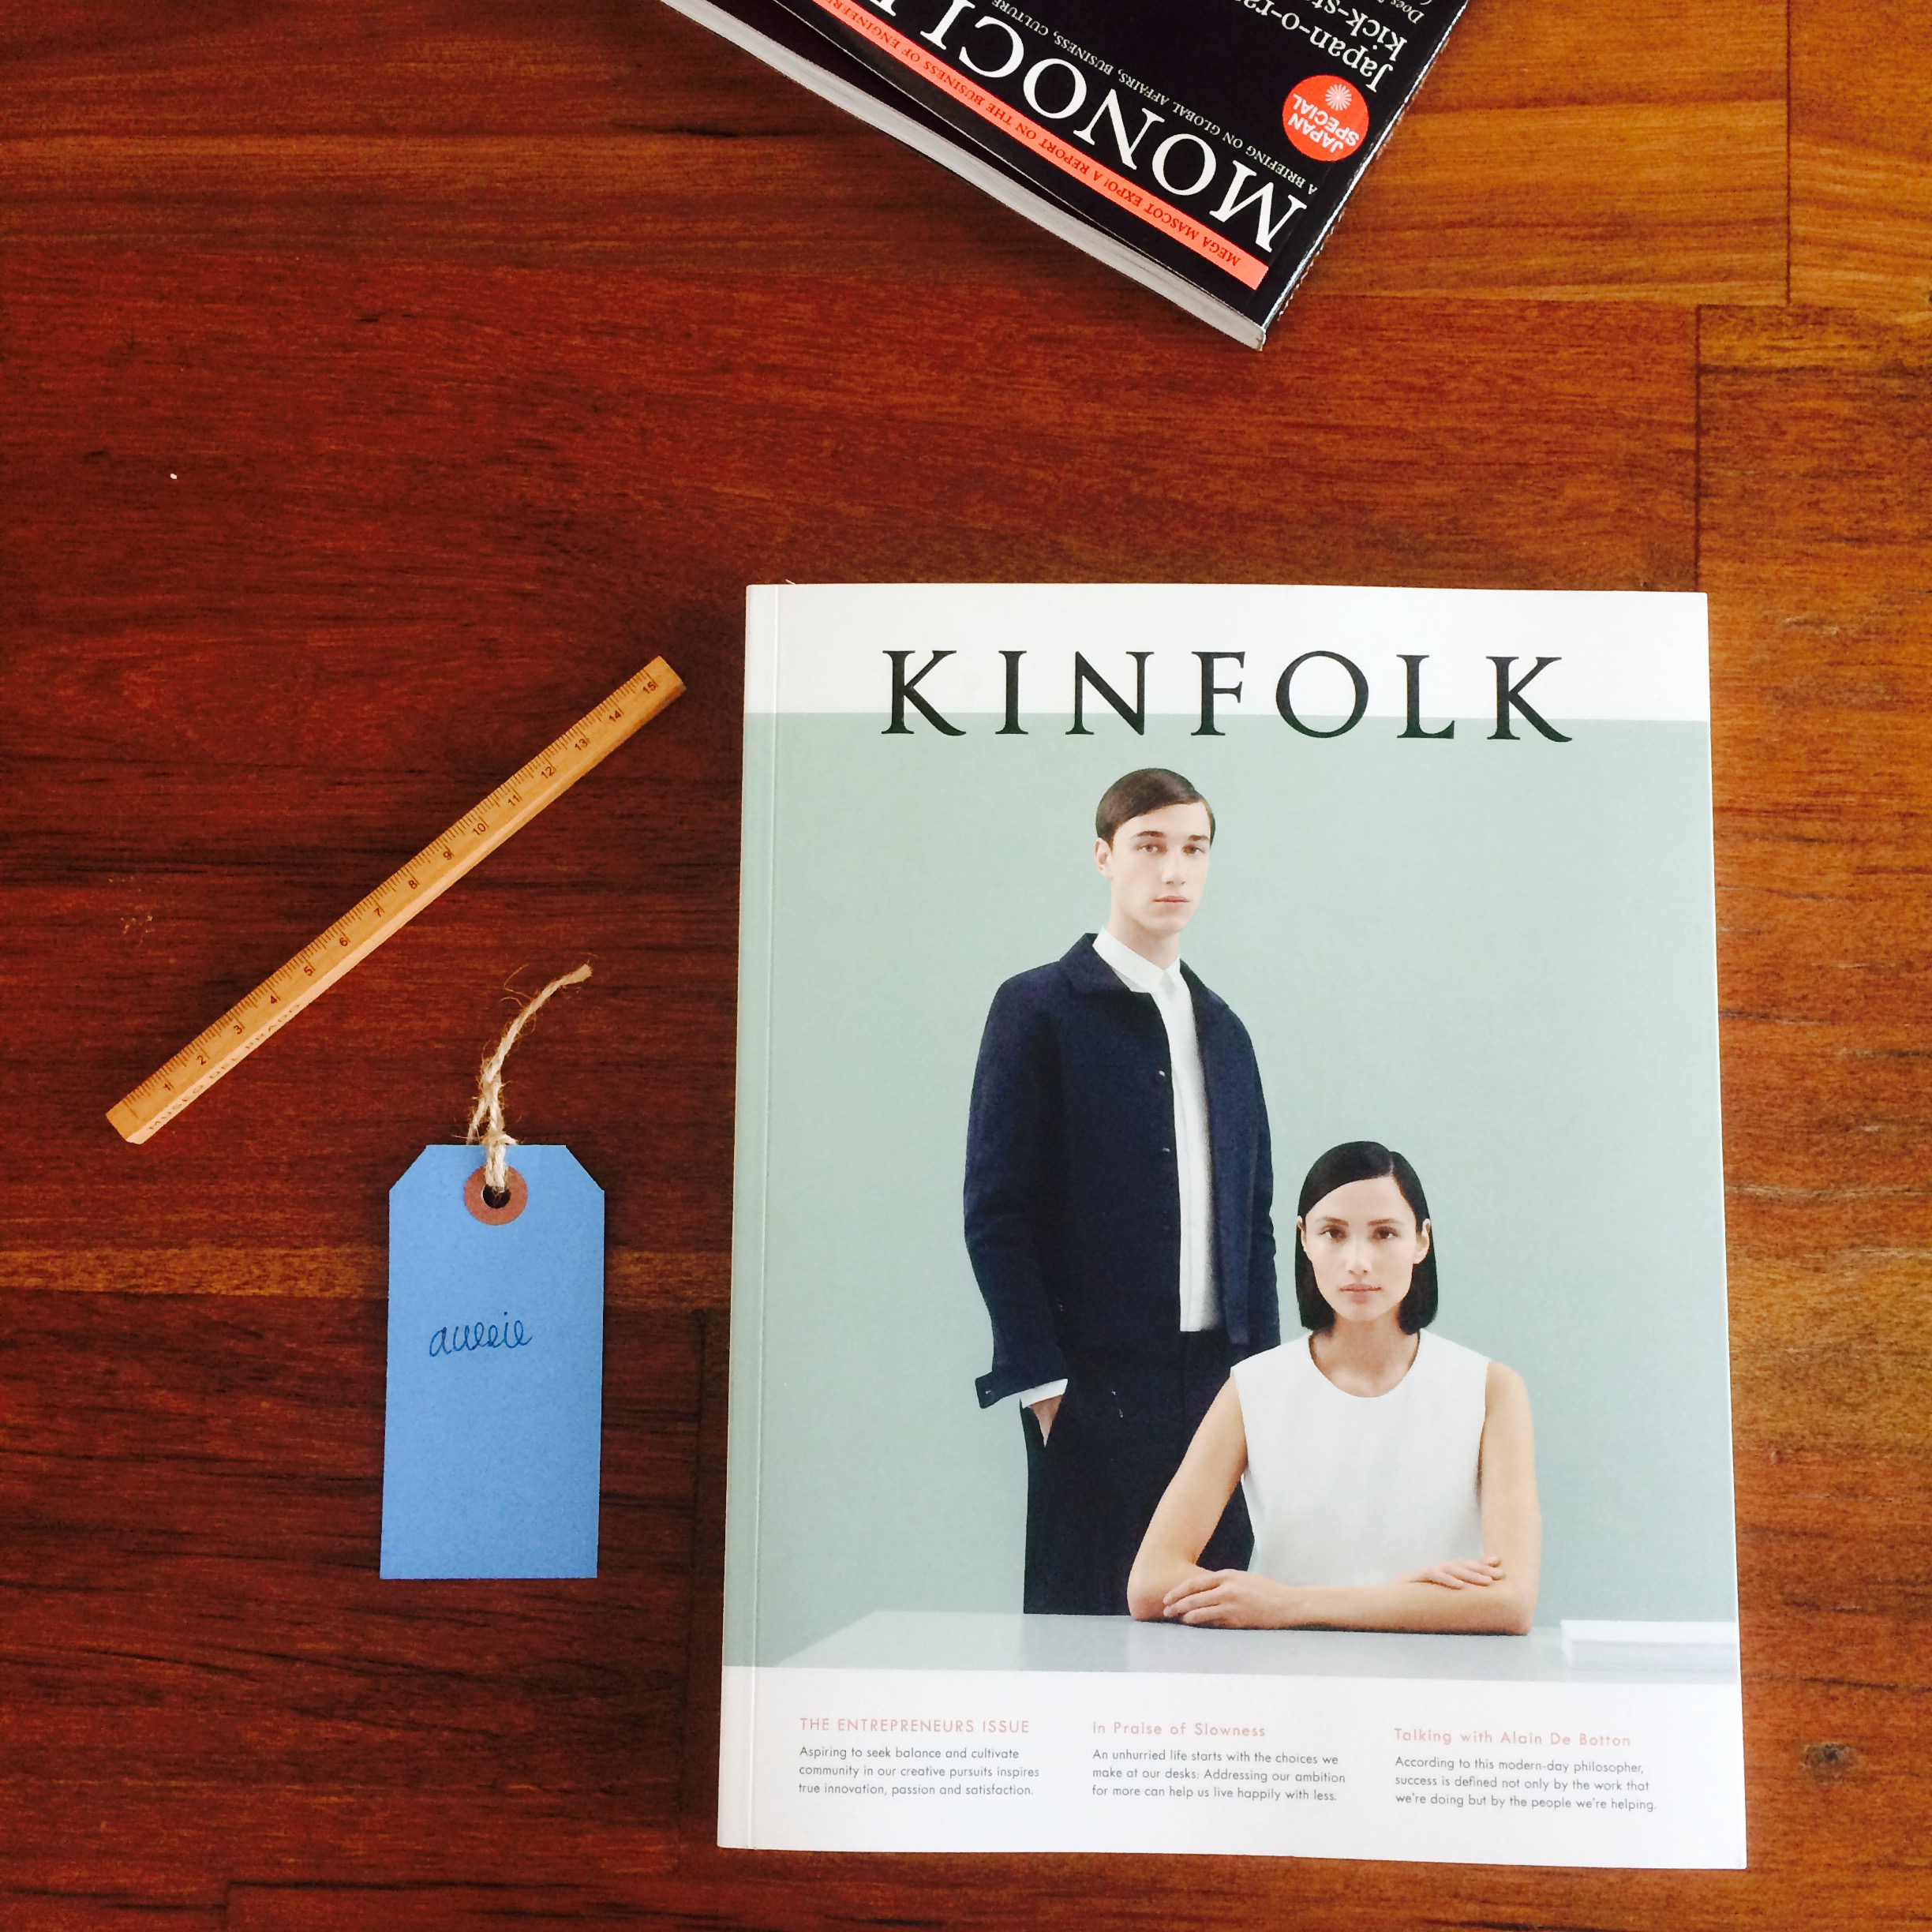 A few recent purchases and a gift: Monocle and Kinfolk magazines and a ruler from the Prado museum in Spain from a friend.